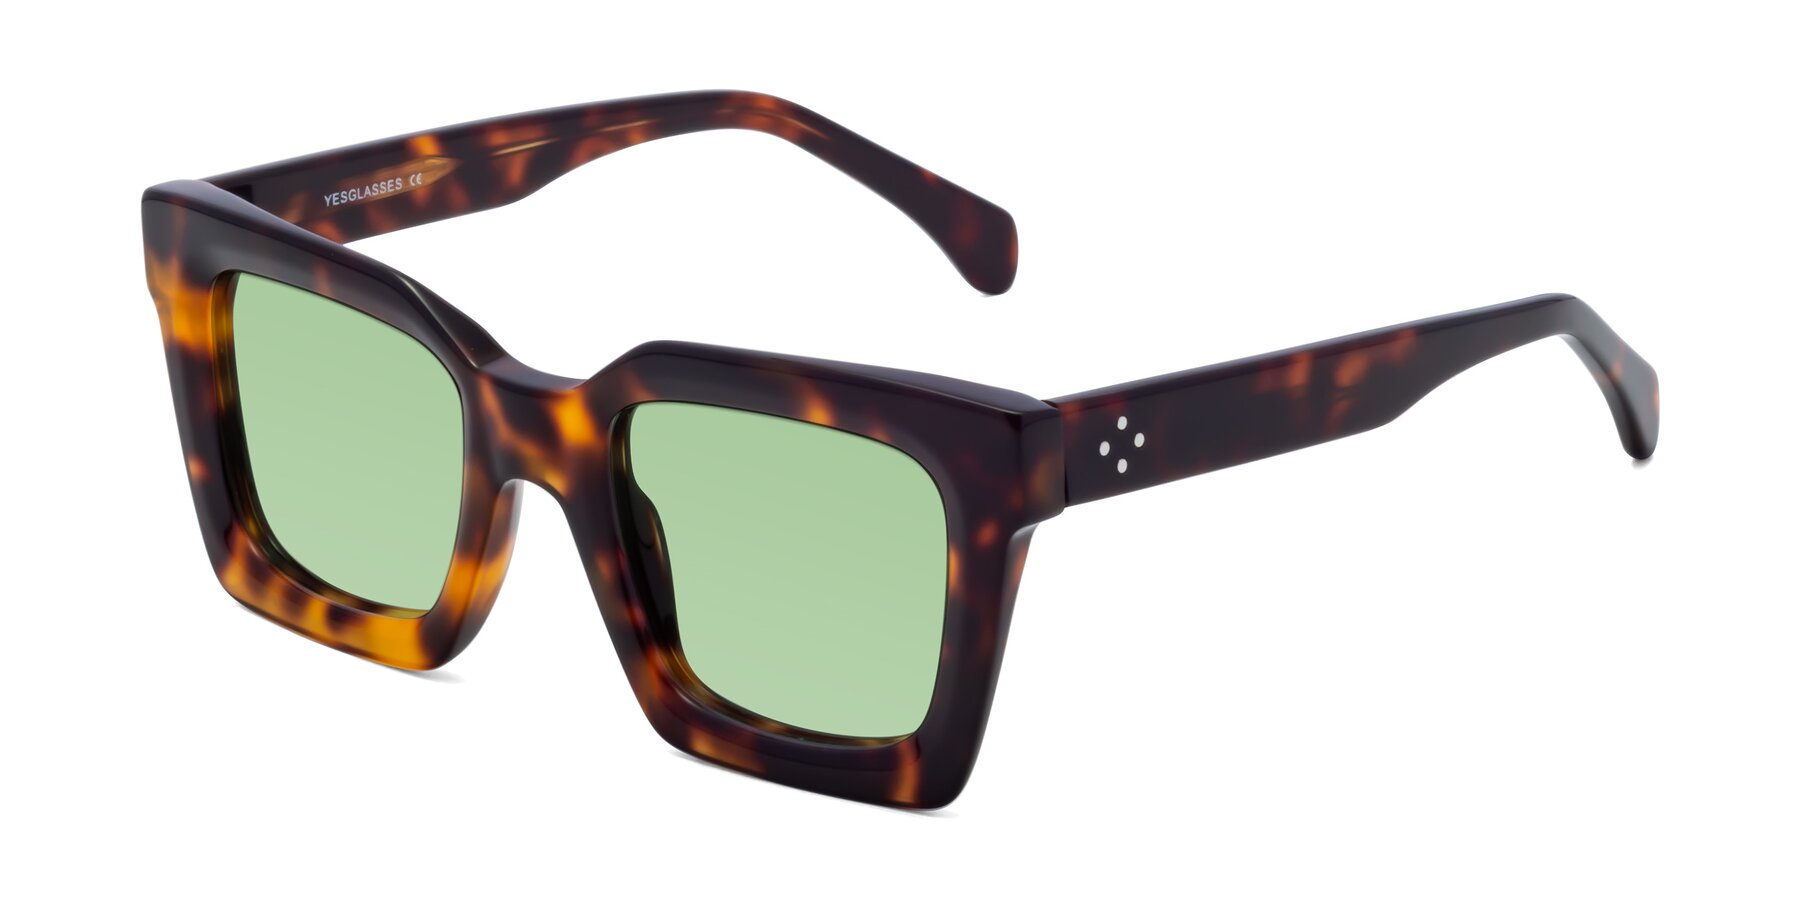 Angle of Piper in Tortoise with Medium Green Tinted Lenses